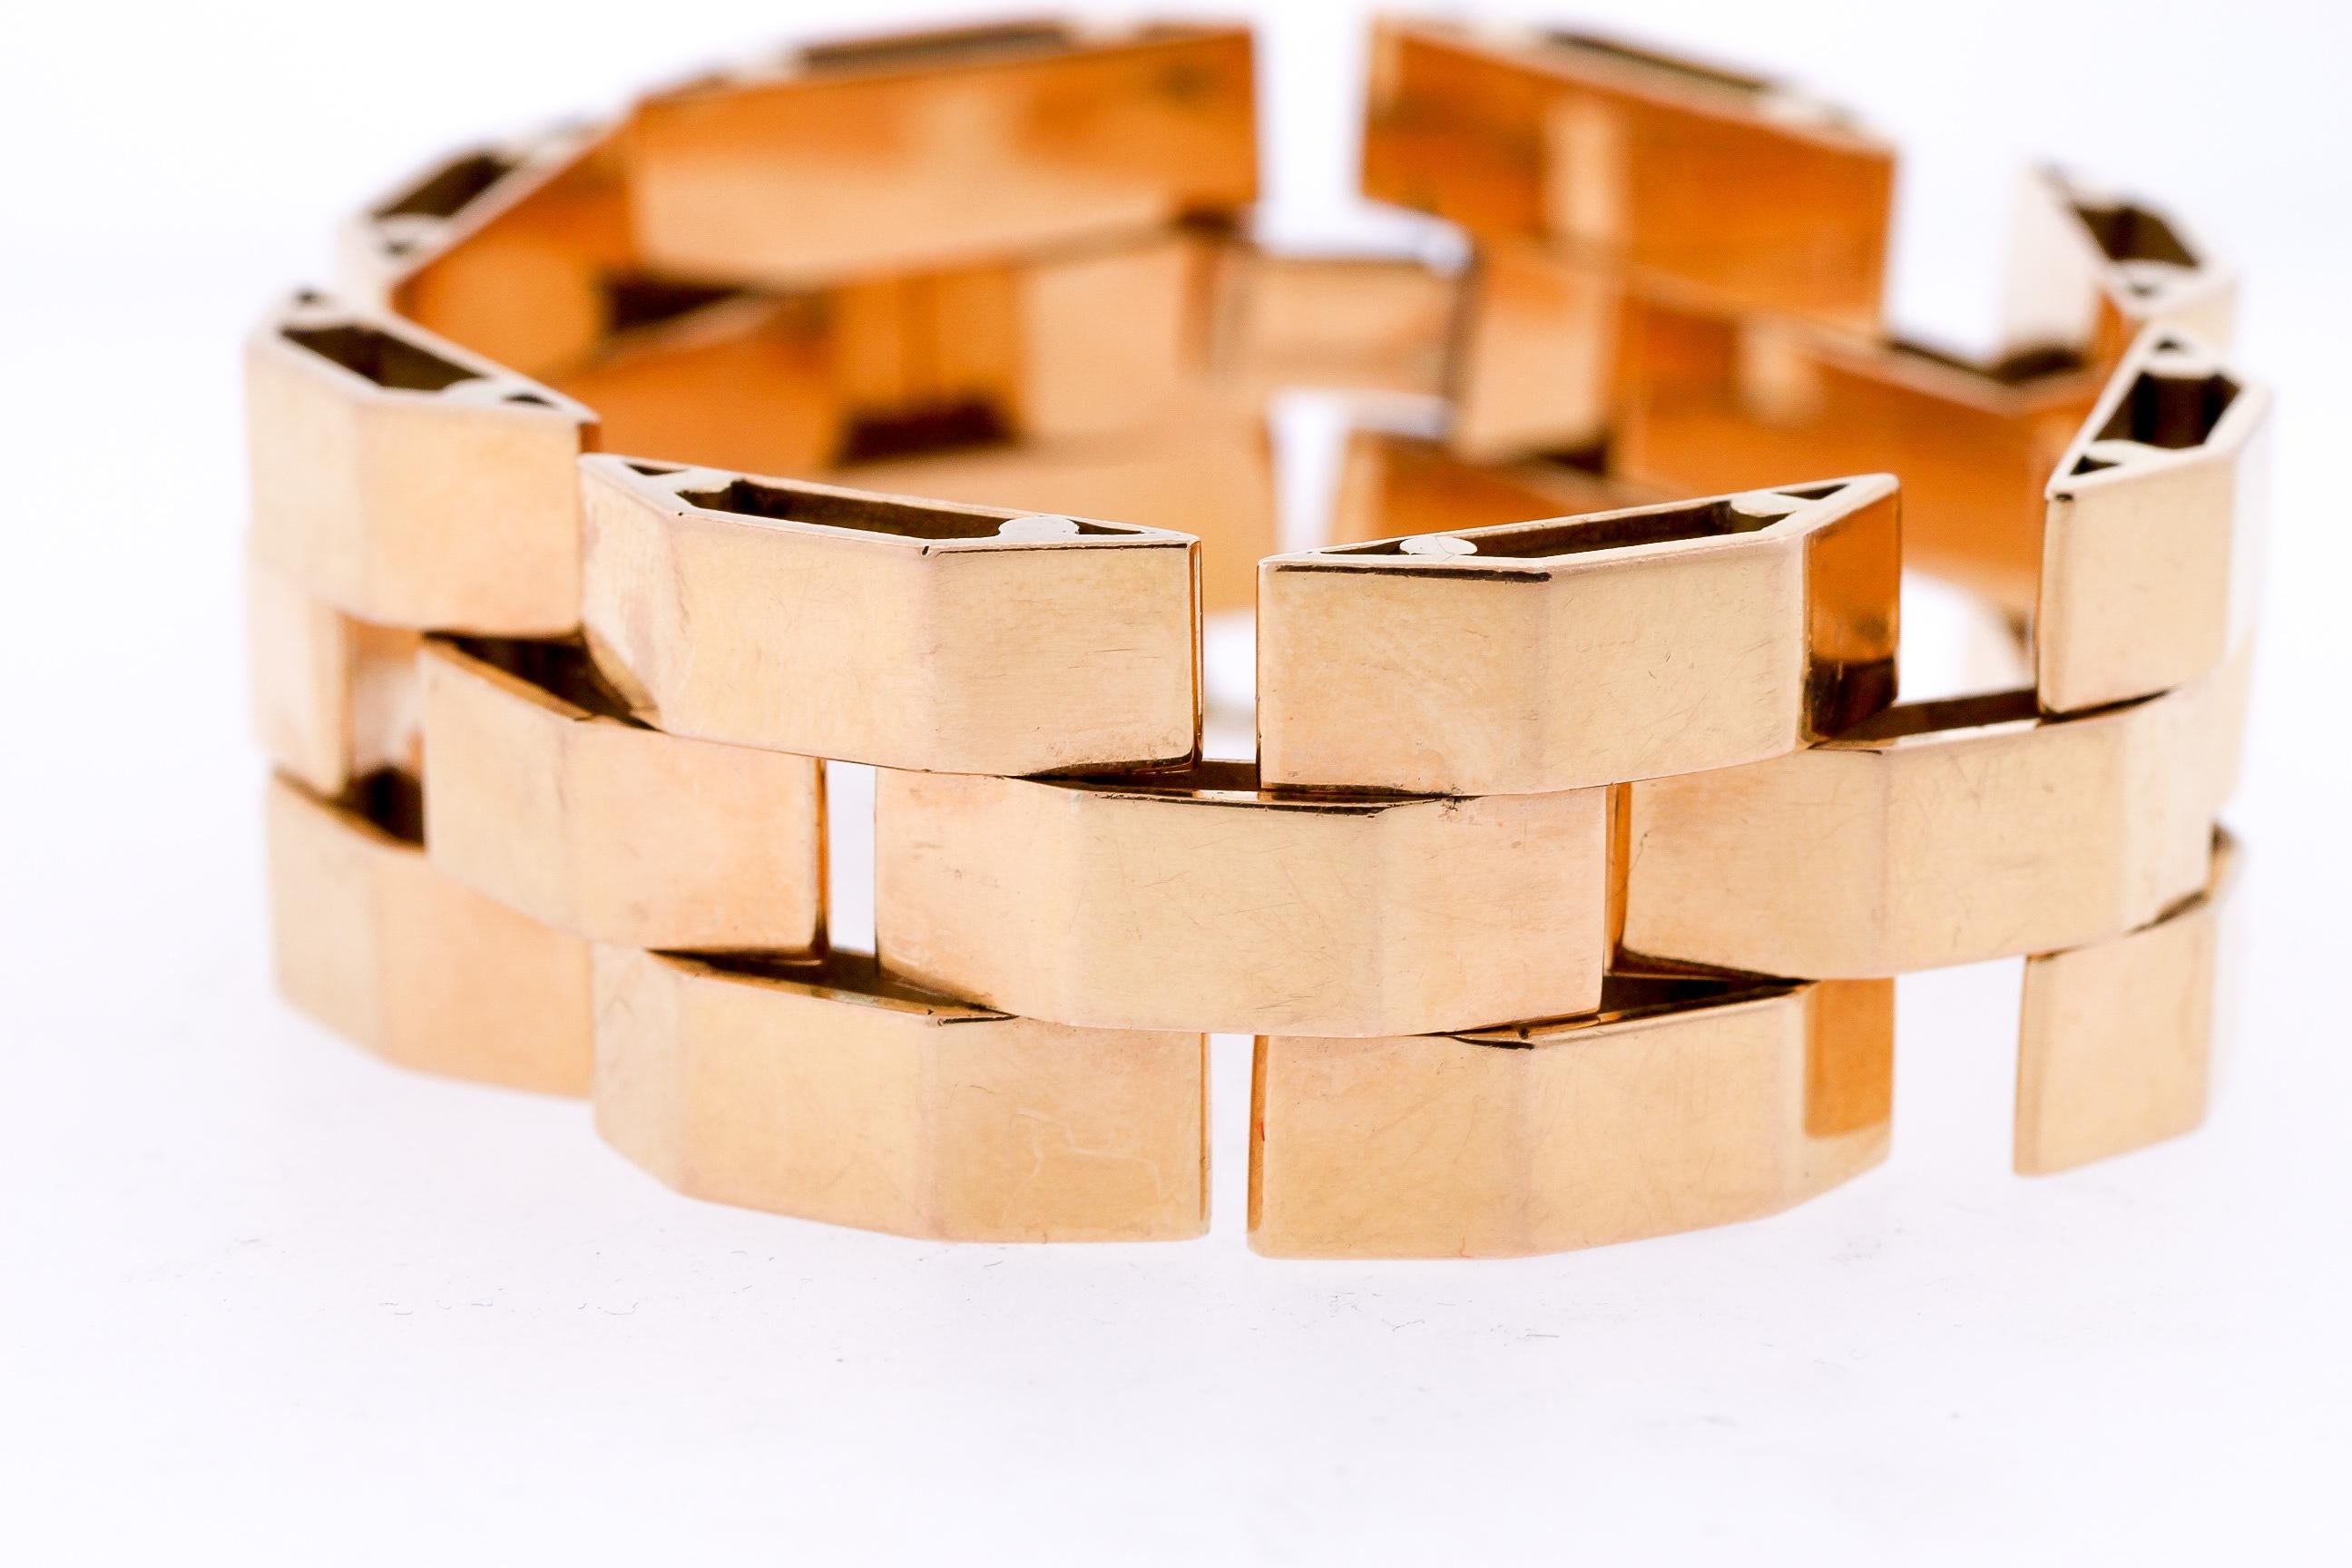 A wide vintage Retro 18k rose gold tank bracelet with French hallmarks, circa 1940. This bracelet is a classic example of a Retro tank bracelet, named after the tread of a tank. World War II greatly influenced jewelry design and styles, as women